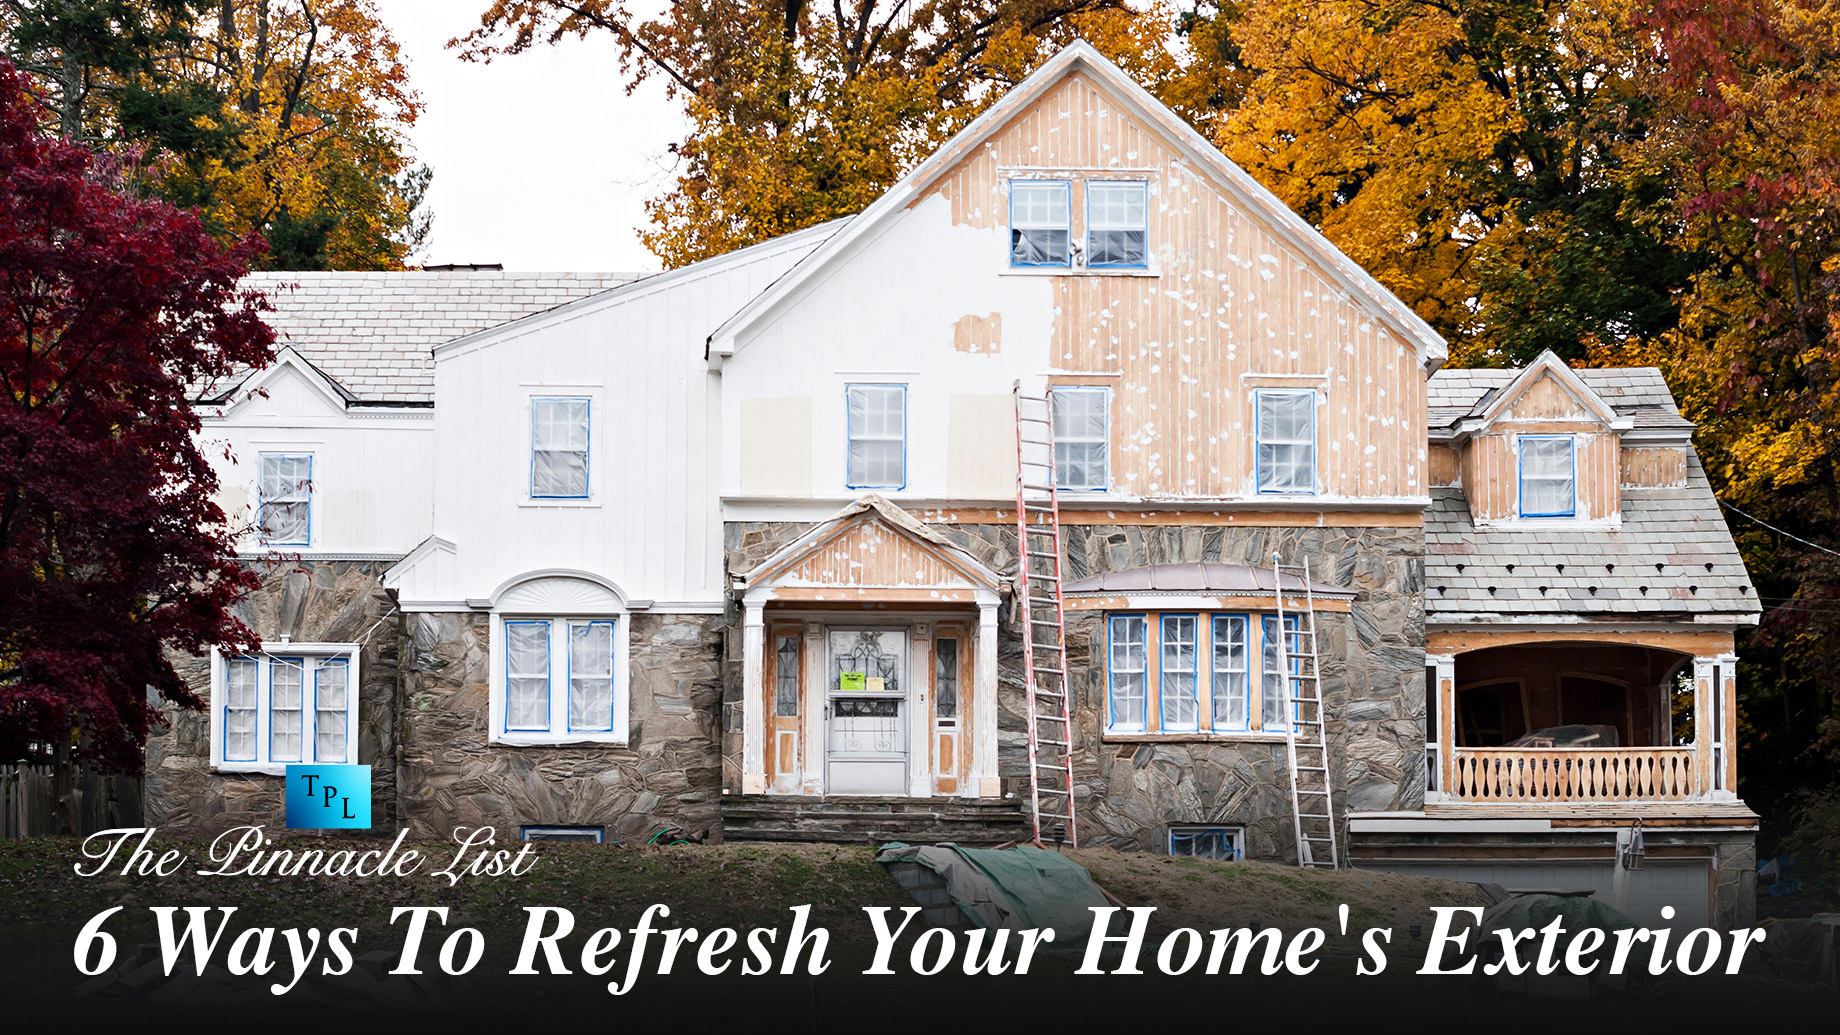 6 Ways To Refresh Your Home’s Exterior